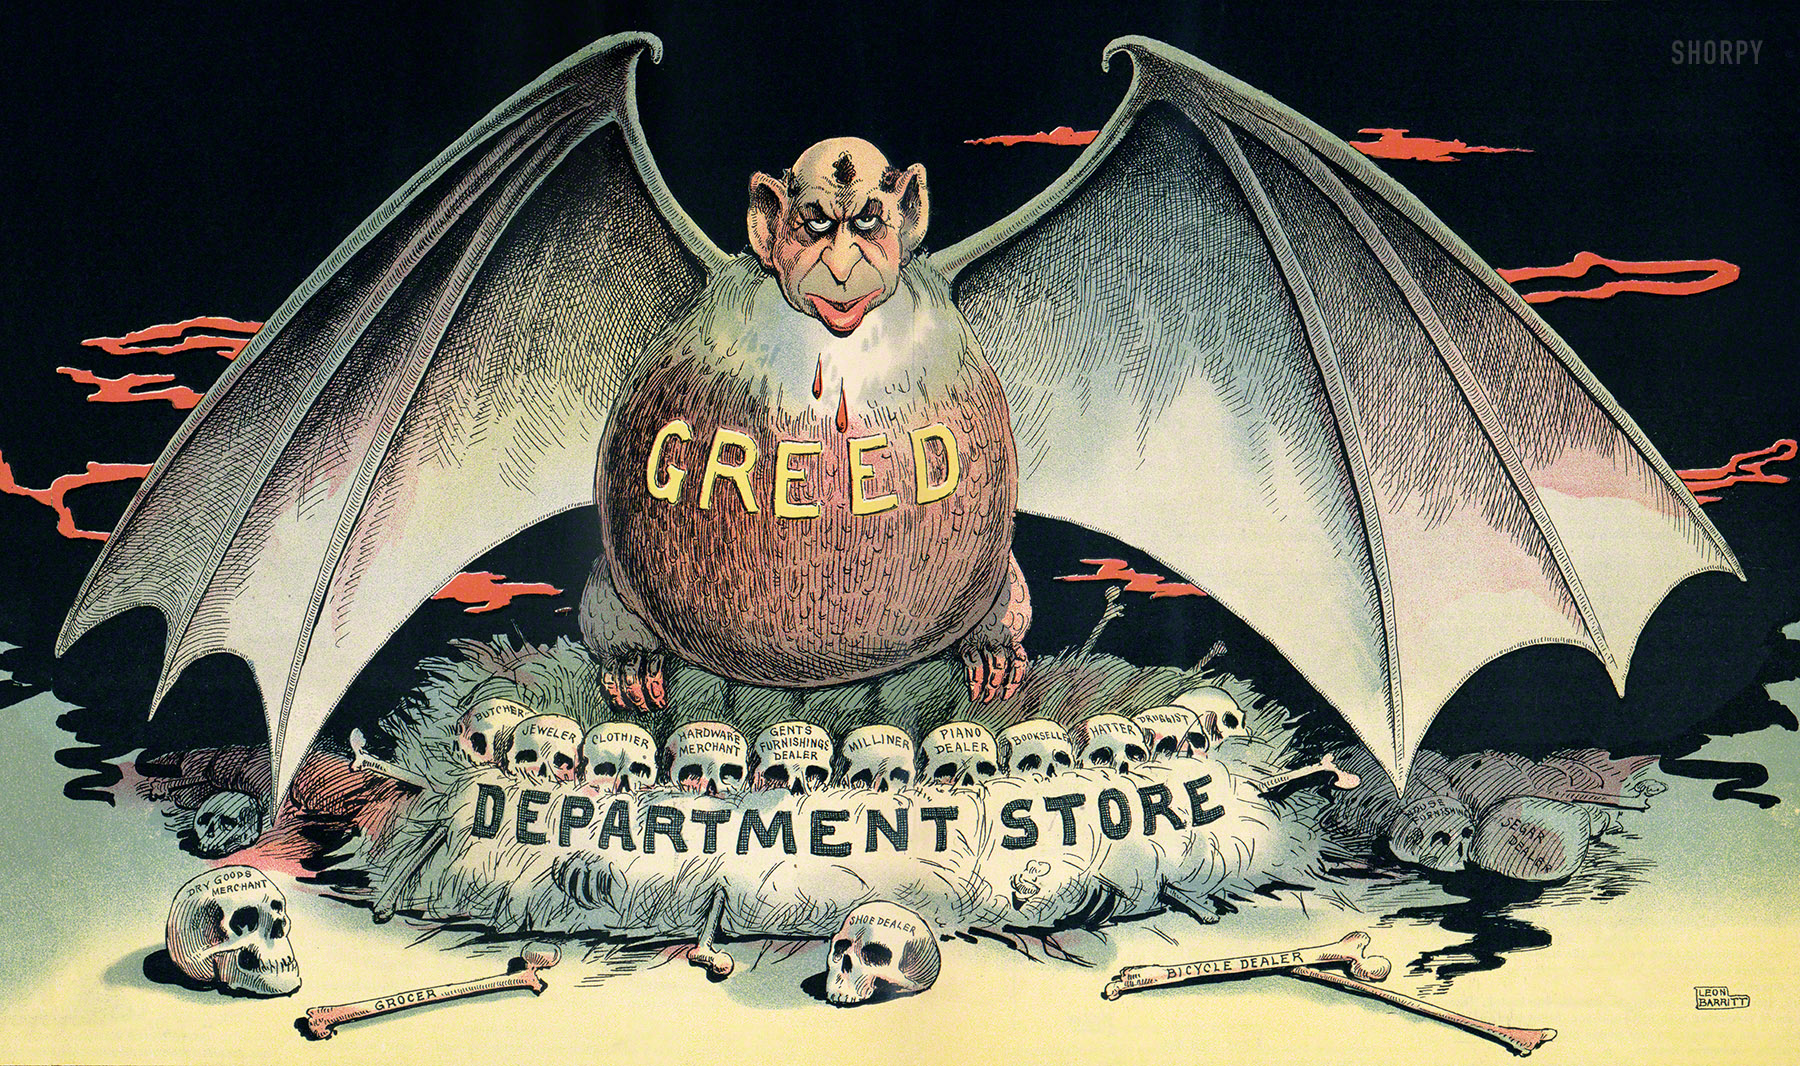 For your Halloween enjoyment we present "The Commercial Vampire," a Leon Barritt cartoon from the July 20, 1898, issue of Vim, a short-lived satirical weekly published in New York. Painting department stores as bloodthirsty predators of small independent businesses, the same argument made today in some quarters against giant retailers like Wal-Mart and Amazon. View full size.